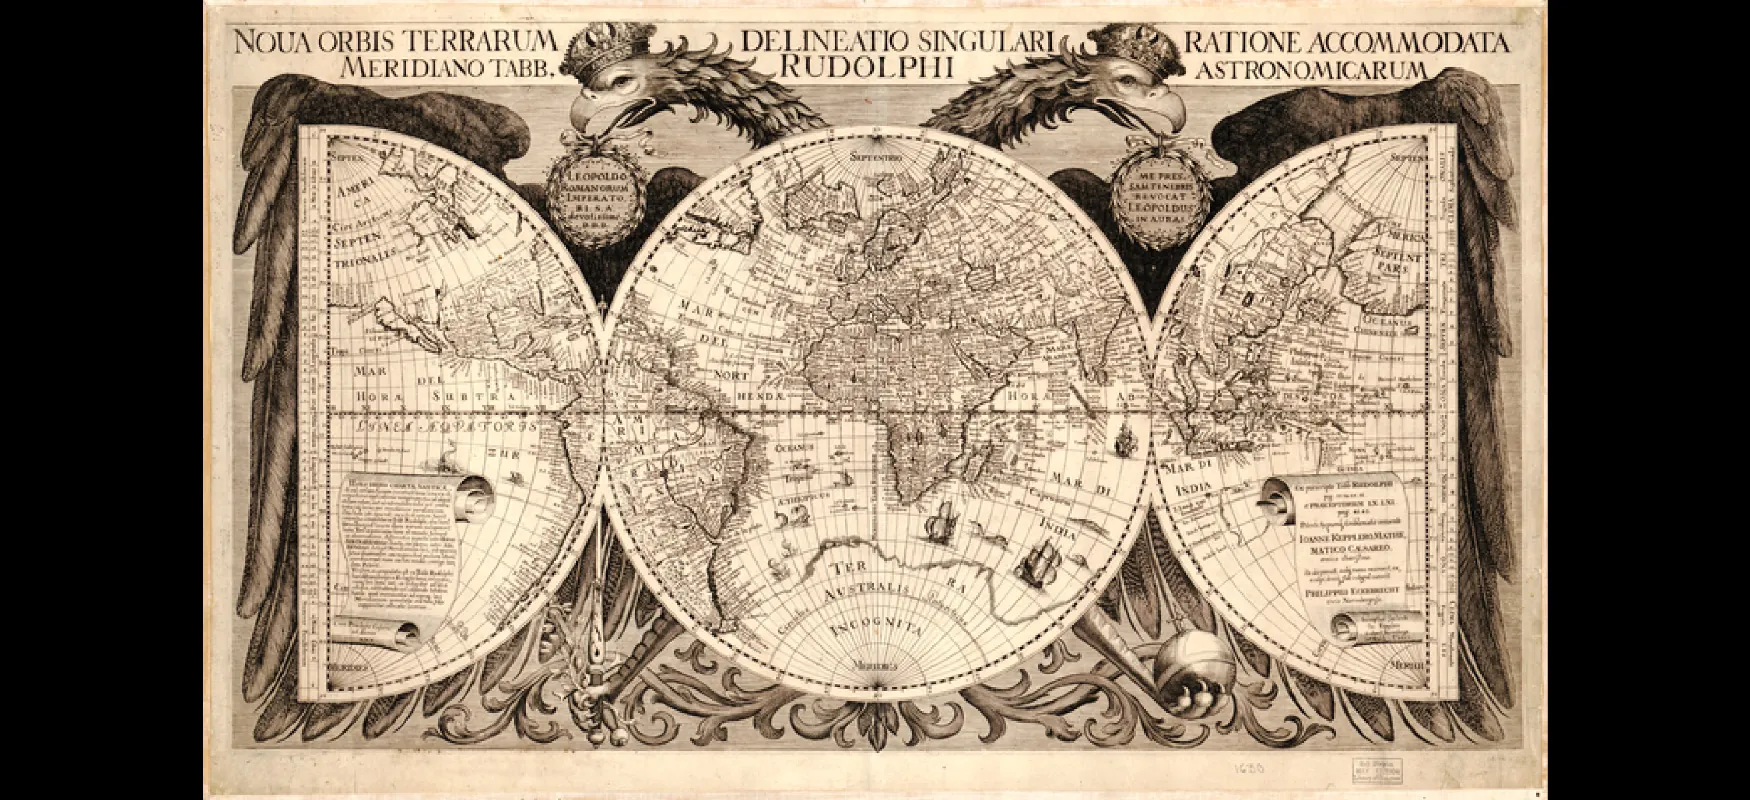 This image shows a map of the world. The map is made up of a circle in the middle and two semicircles on either side. The margins around the map are decorated with the Germanic, double-headed imperial eagle. The Latin words “Noua orbis terrarum delineatio singulari ratione accommodata meridiano tabb. Rudolphi astronomicarum” appear above the image.